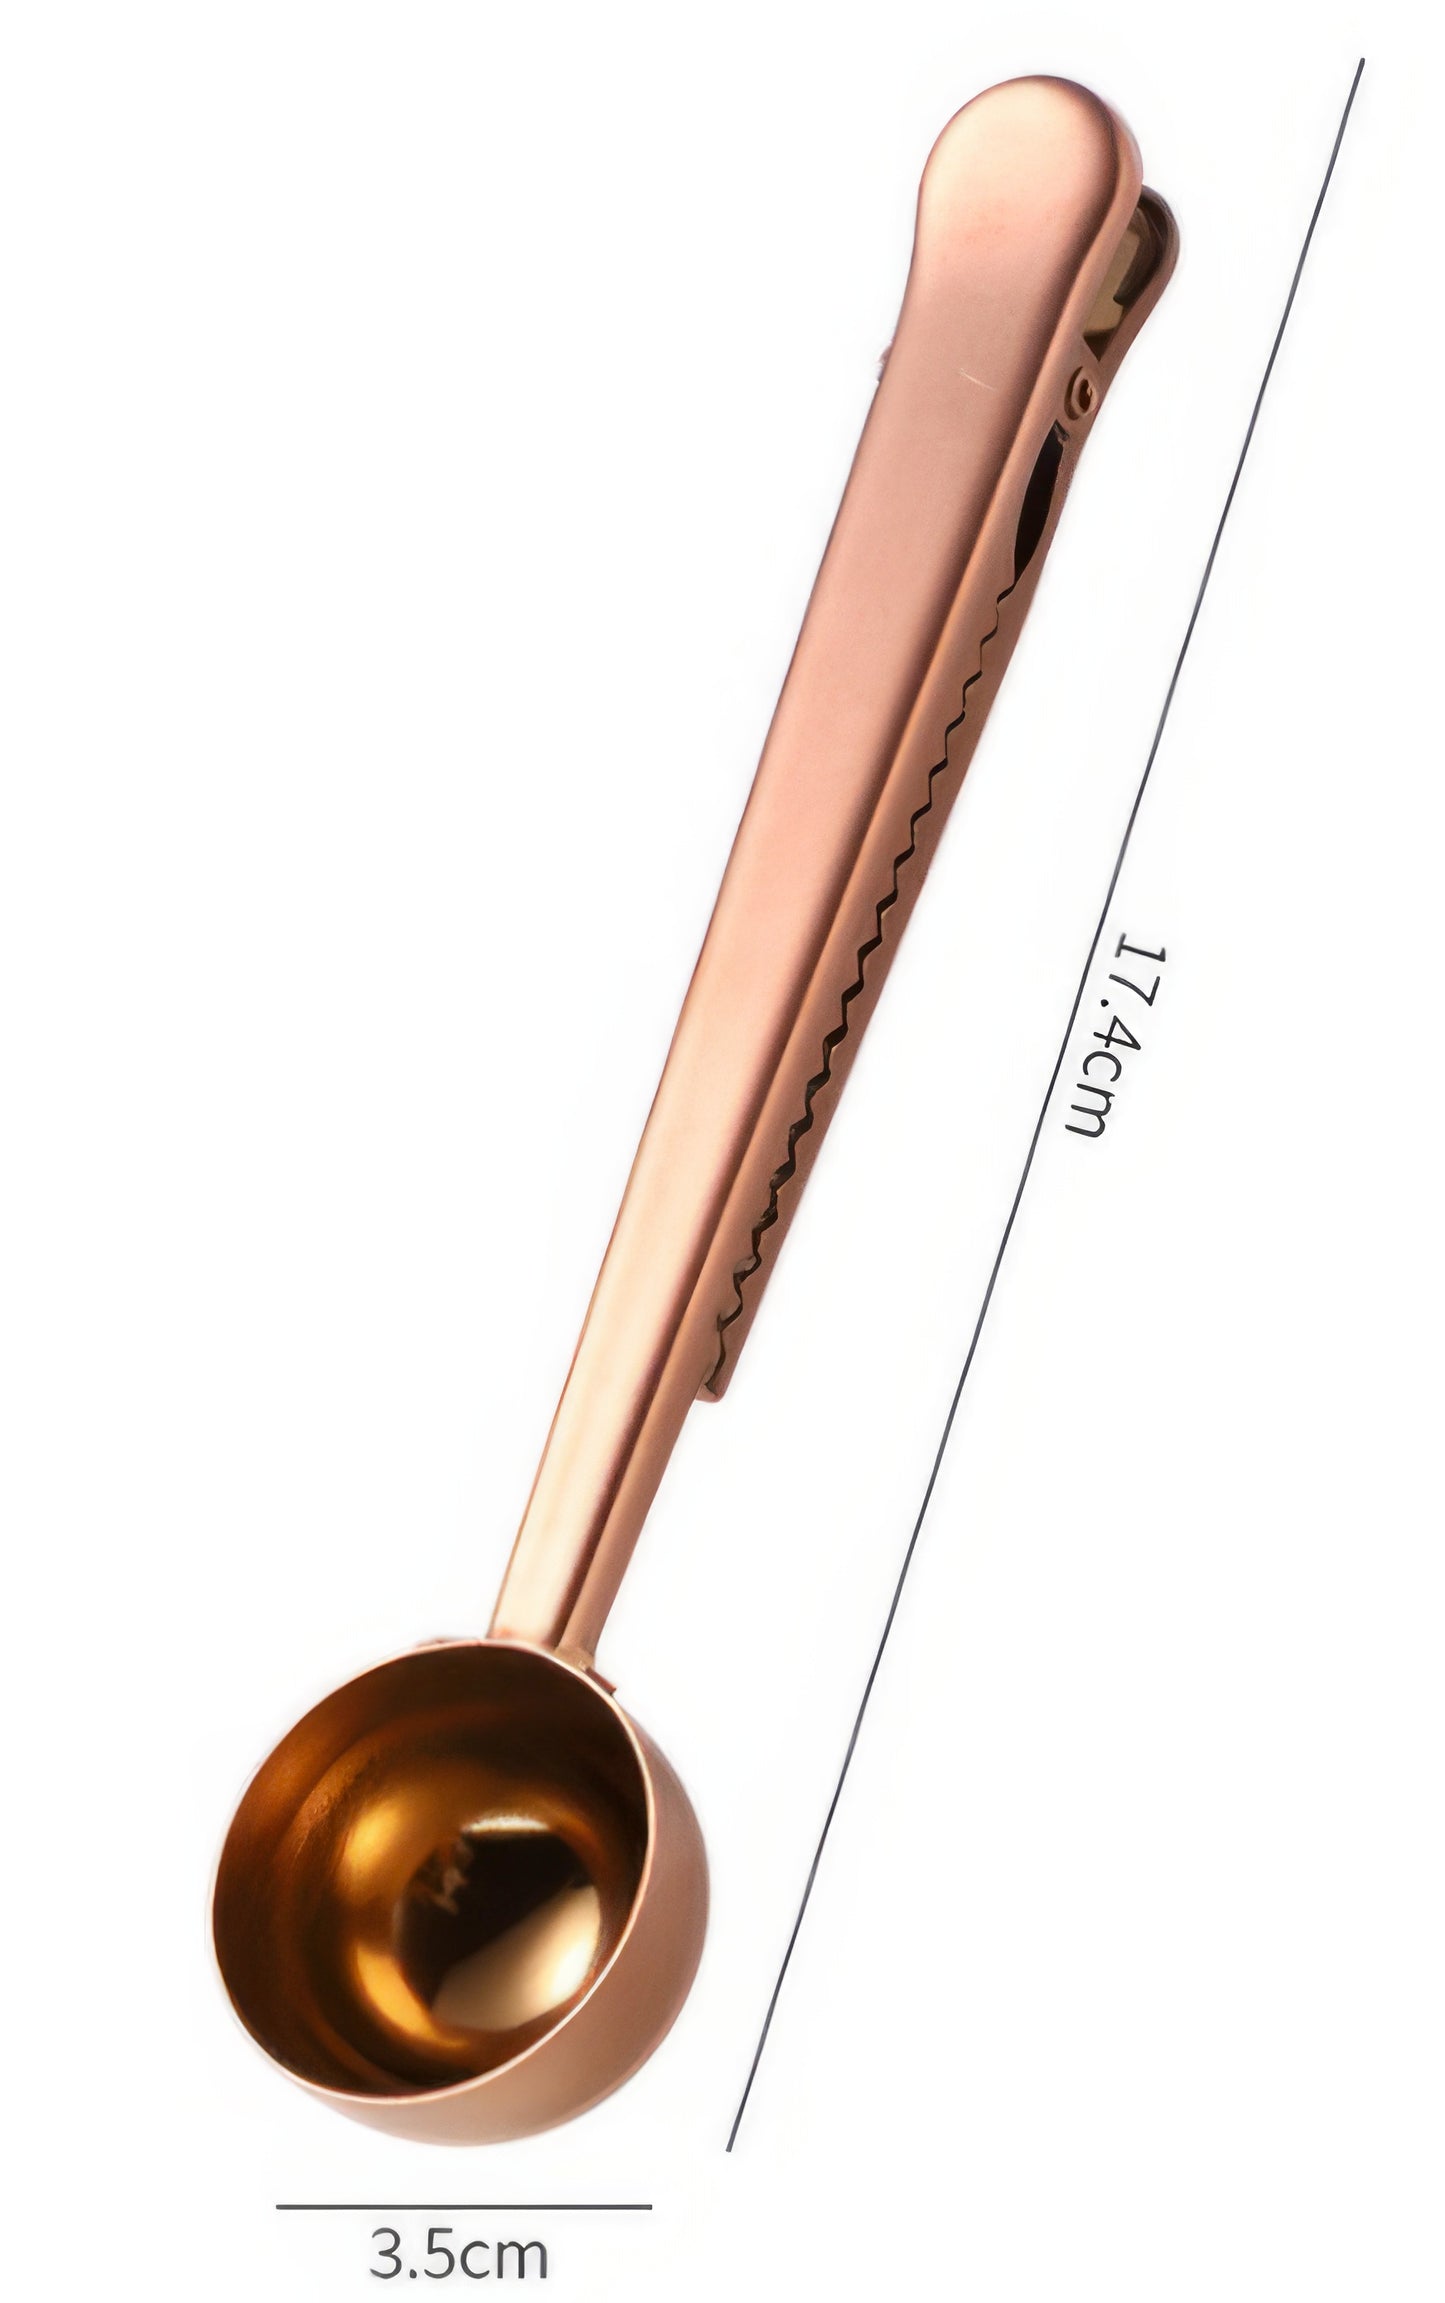 Rose Gold Stainless Steel Coffee Scoop with Clamp